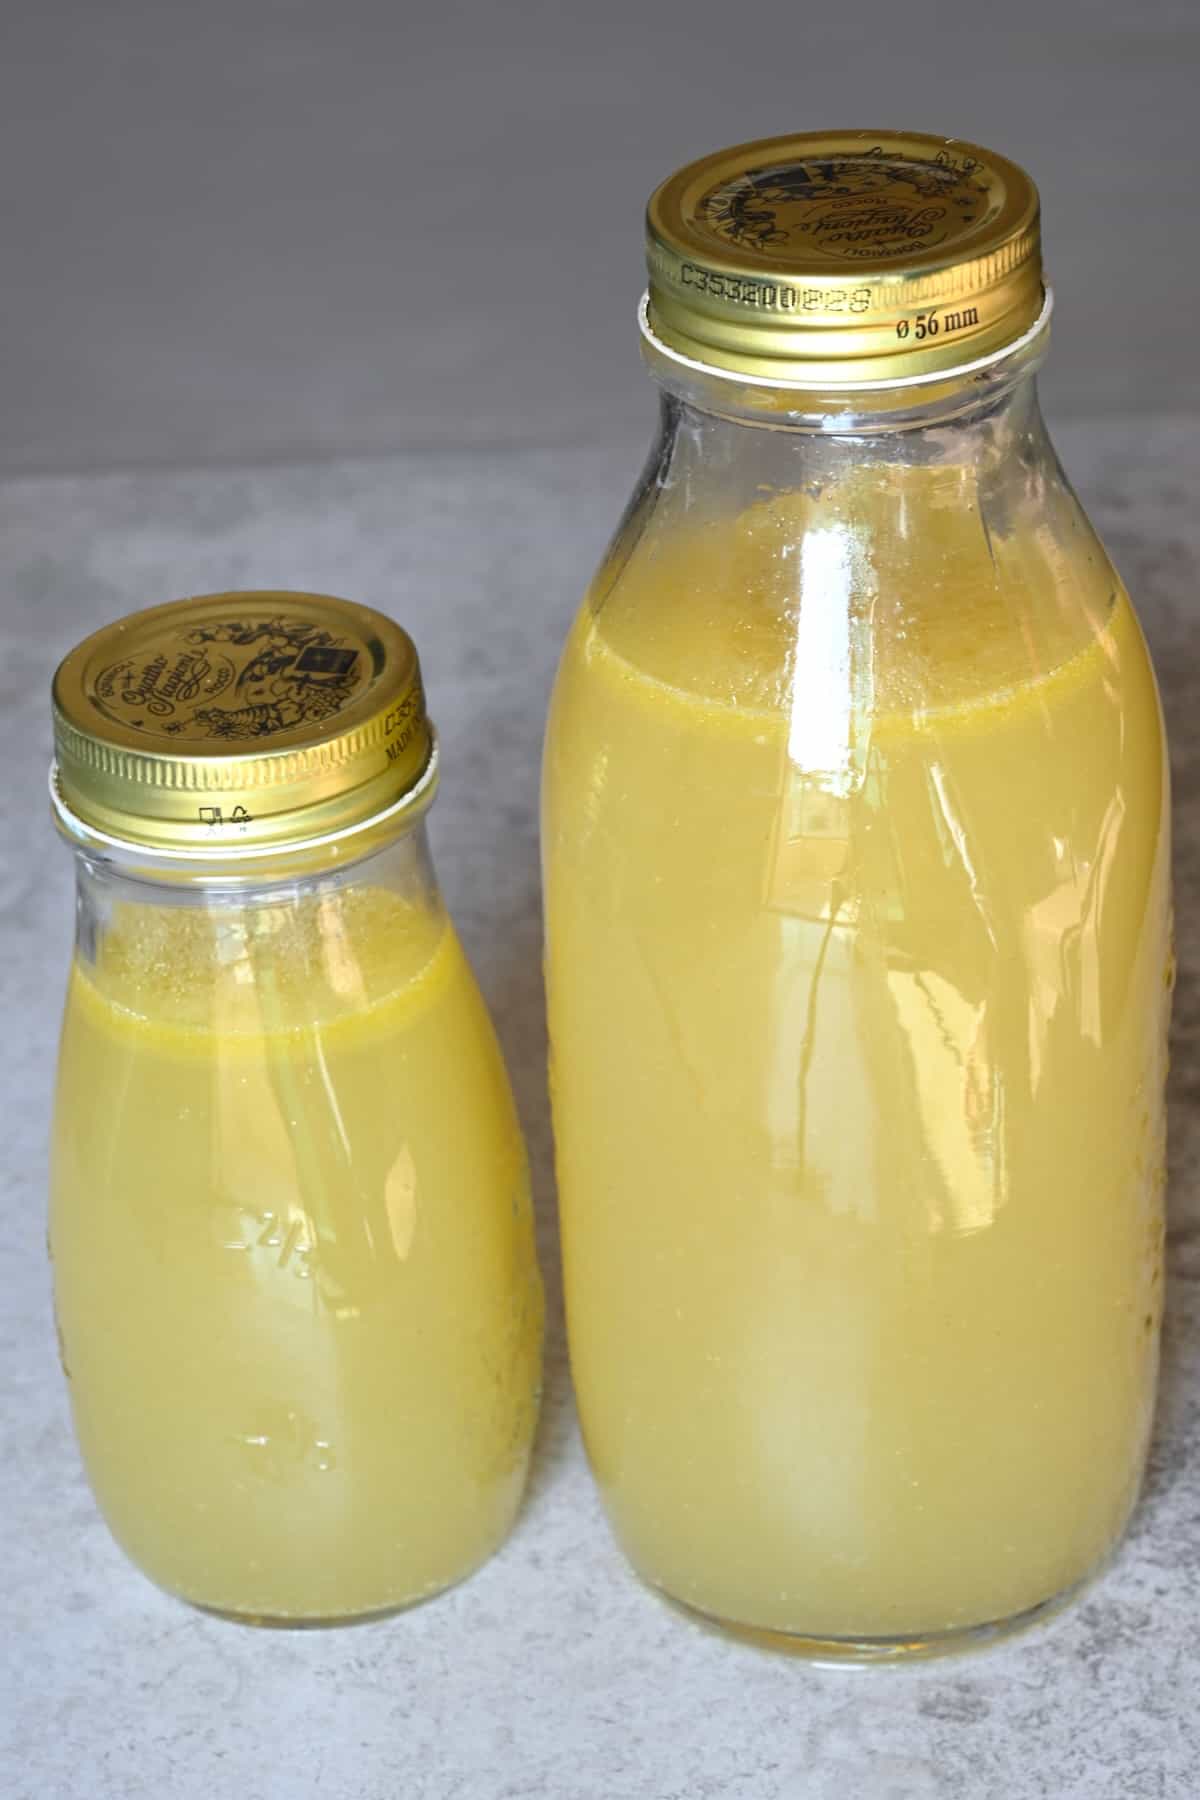 Two bottles with homemade chicken broth